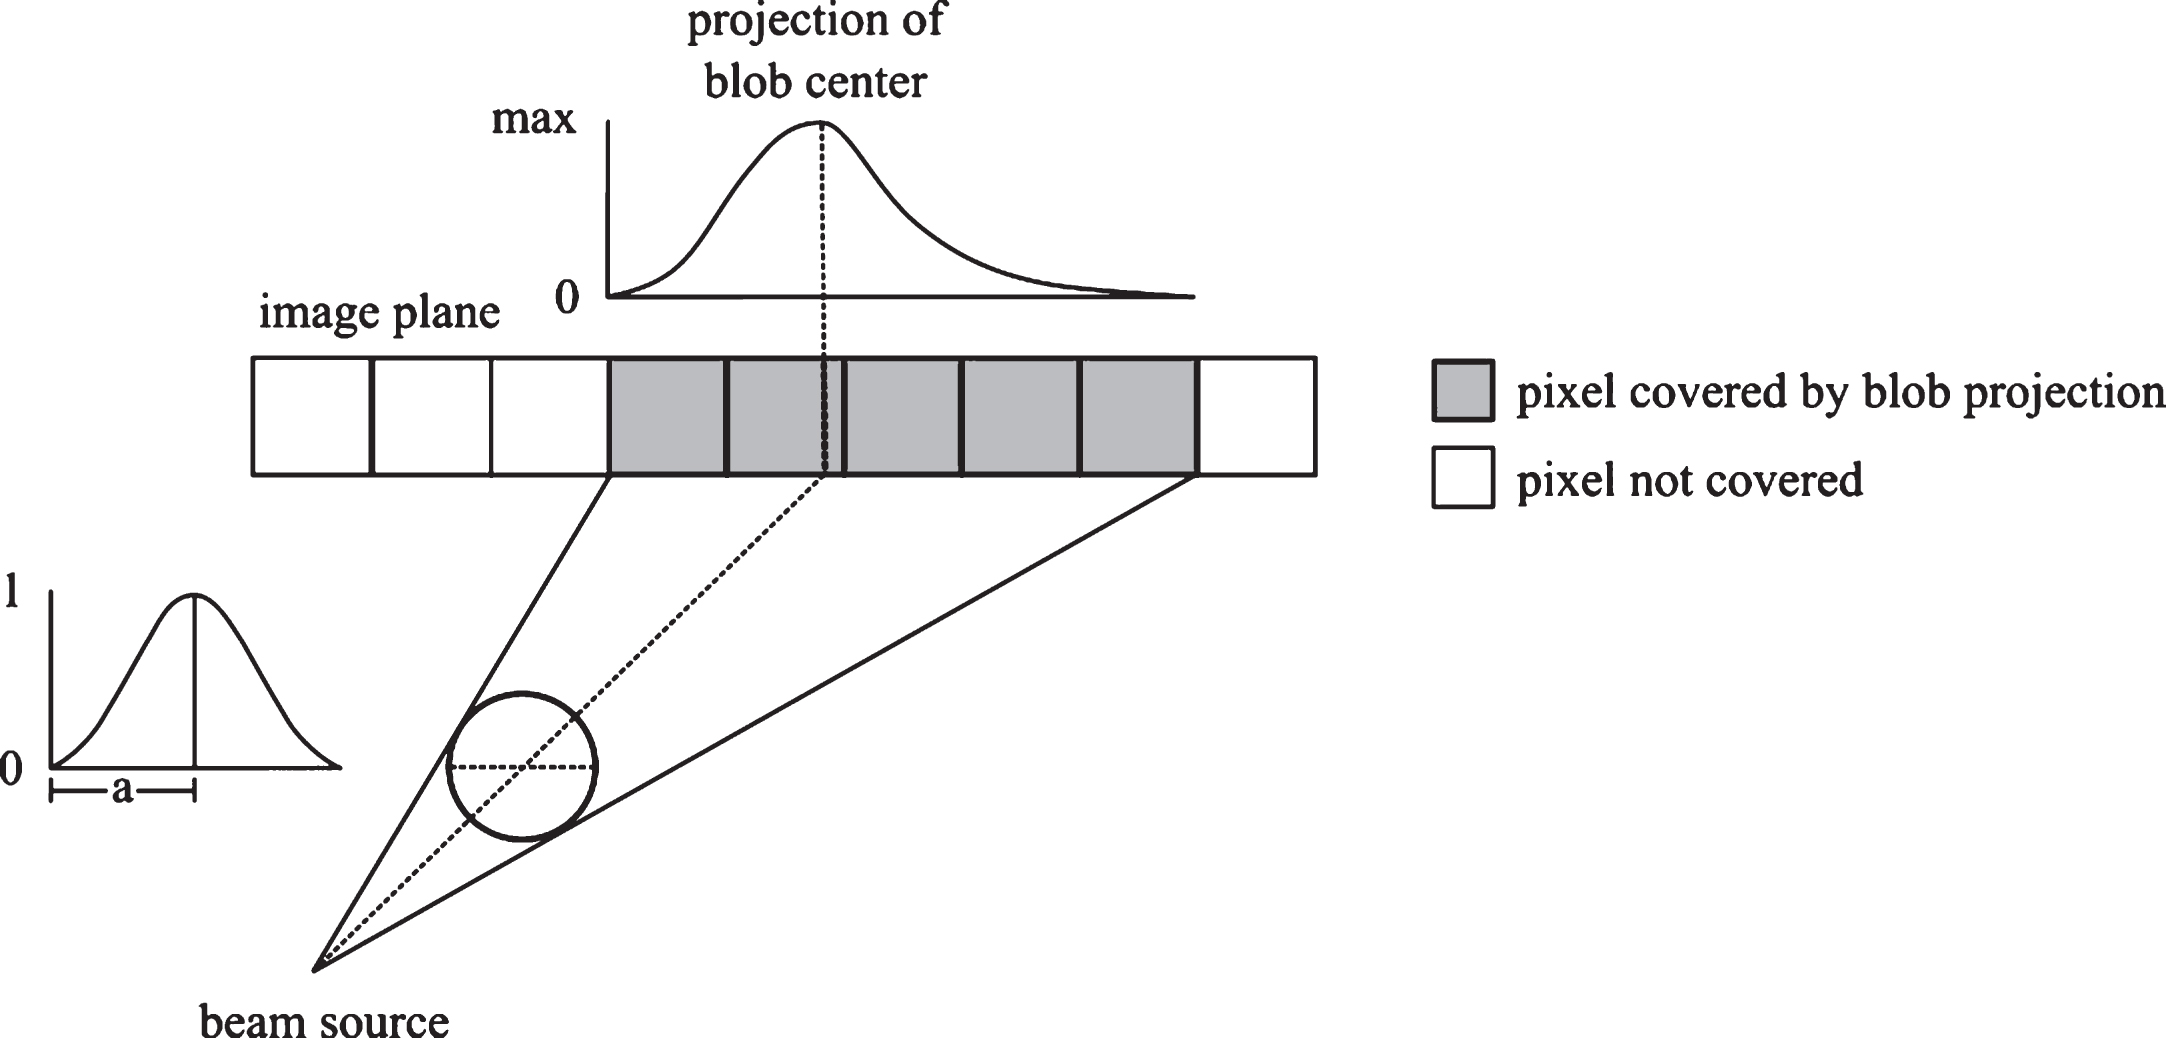 Geometry of the back projection operation. The parallel projection of a three dimensional blob onto a two dimensional grid is a blob with the same radius as the original blob. However, a perspective projection can cover an area on the image plane much larger than the blob itself and is not symmetric in general.